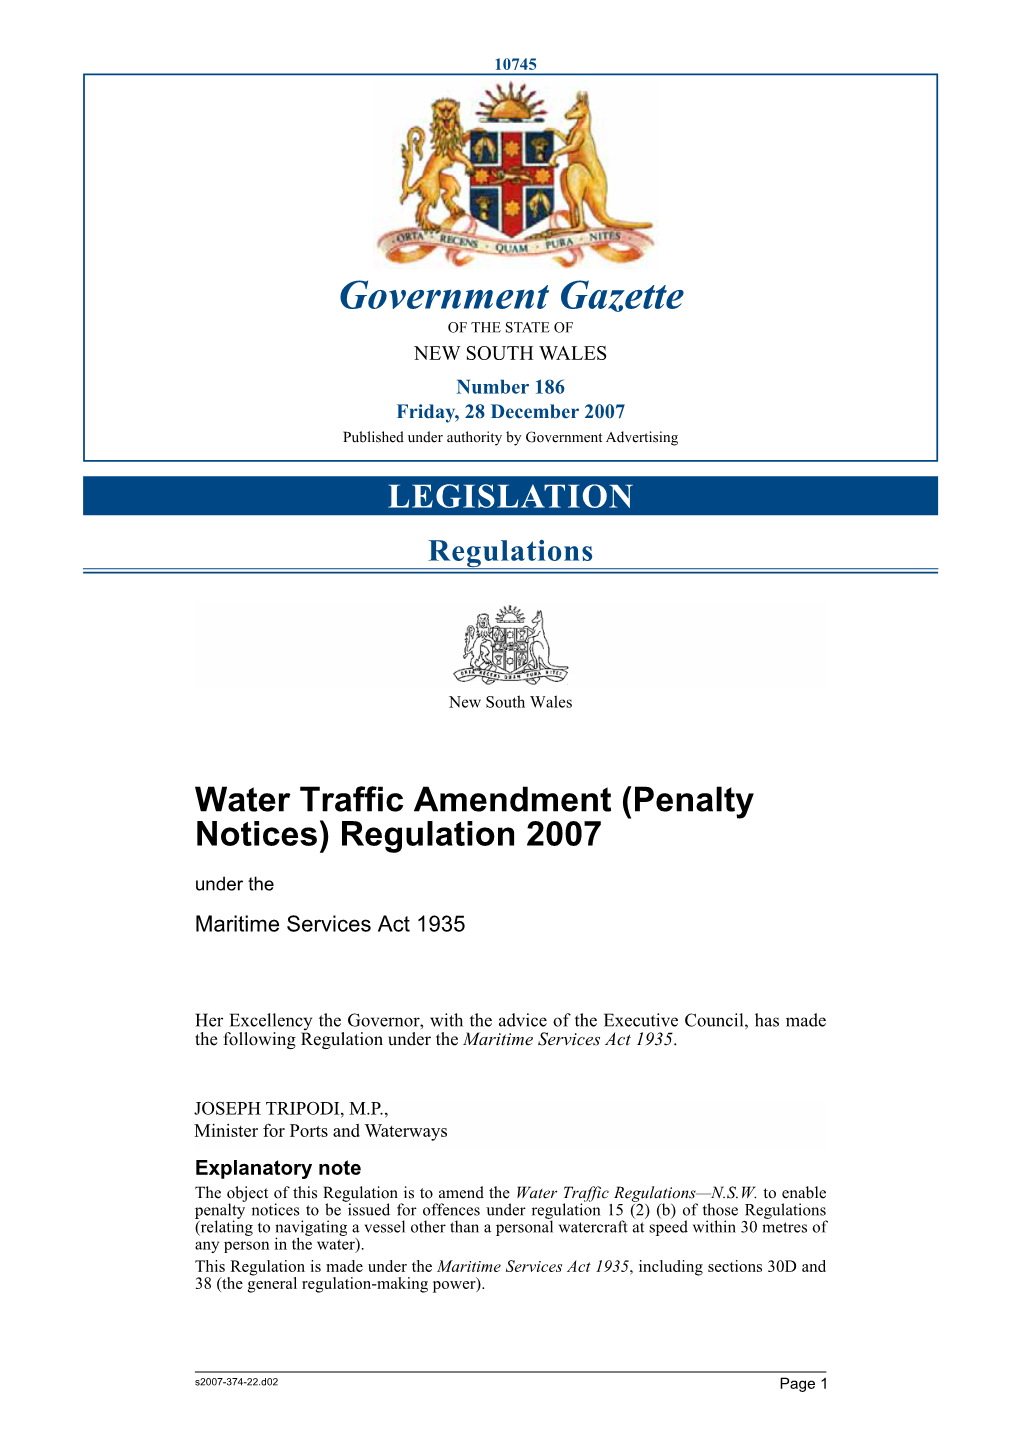 Government Gazette of the STATE of NEW SOUTH WALES Number 186 Friday, 28 December 2007 Published Under Authority by Government Advertising